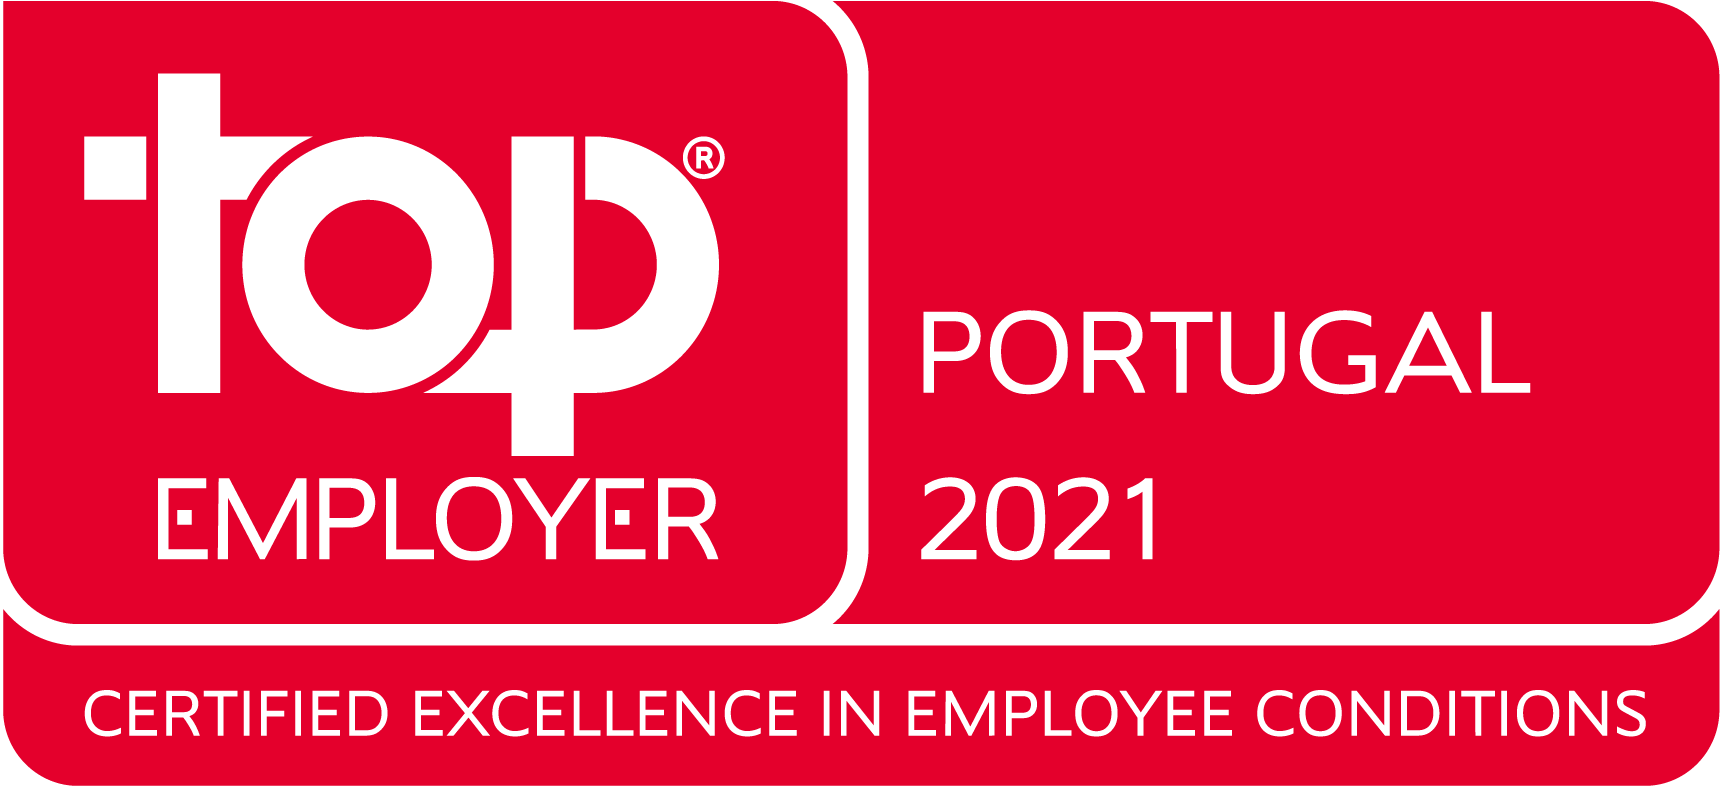 Top Employer Portugal